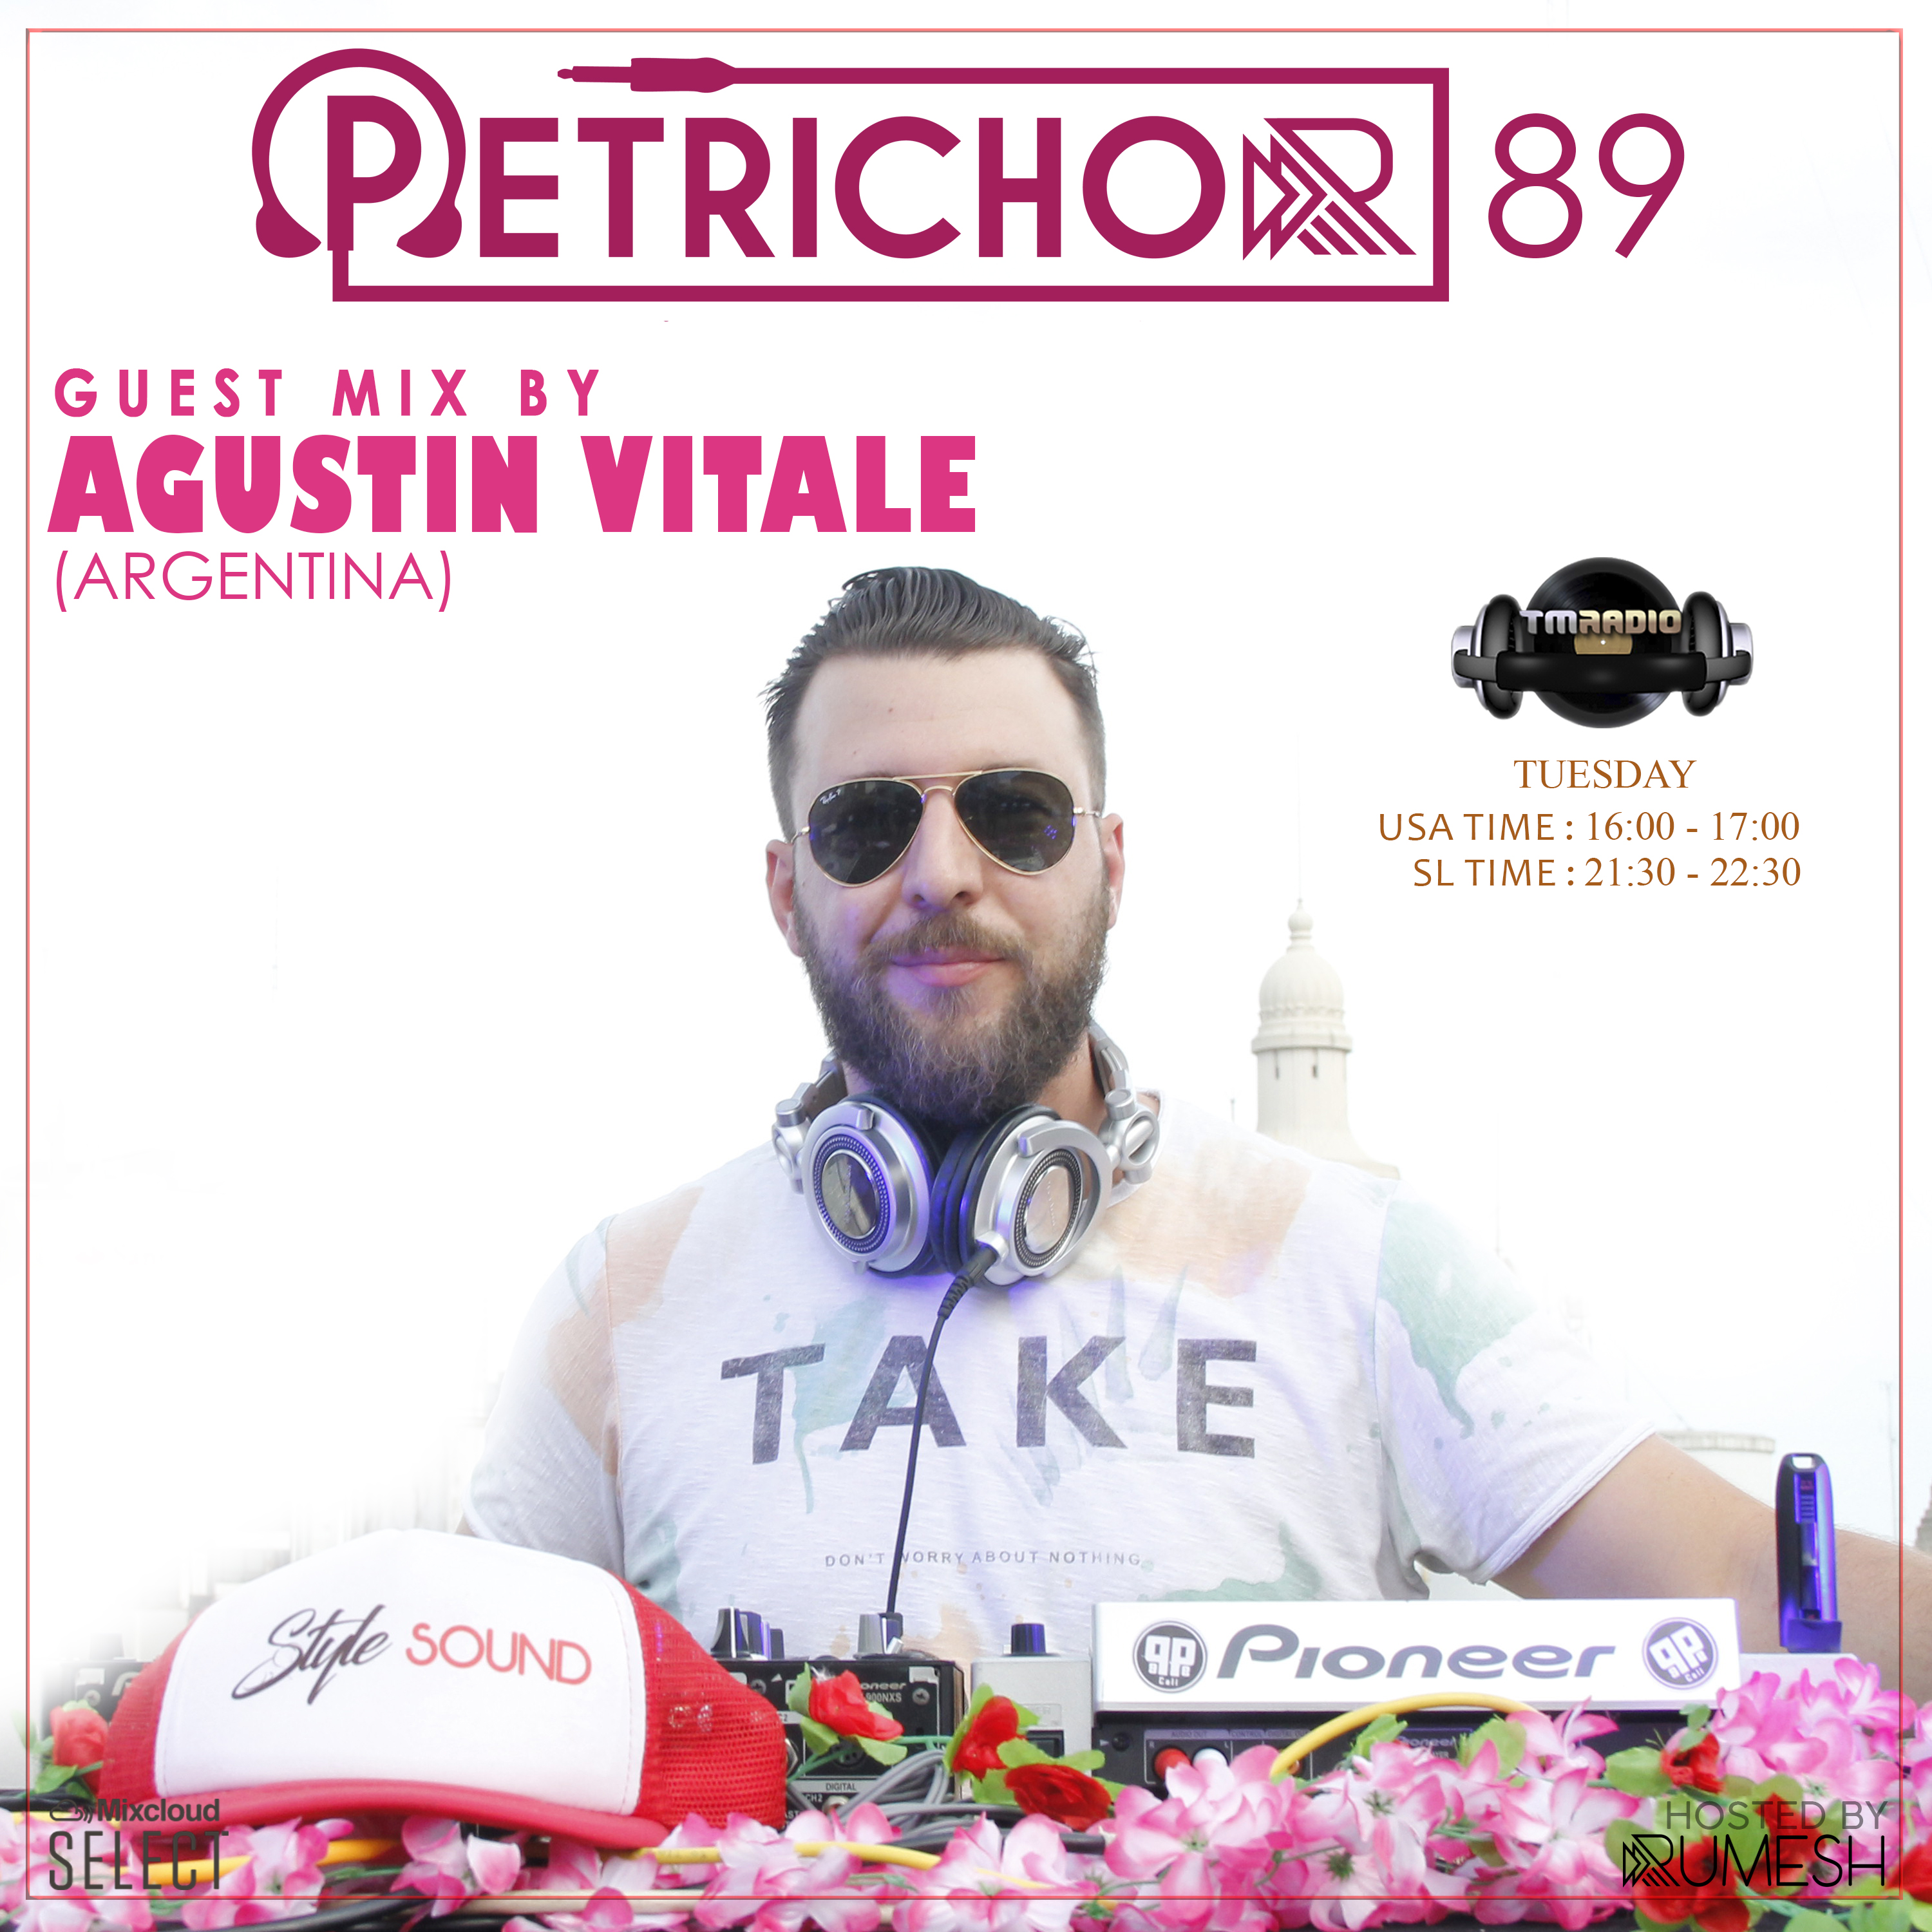 Petrichor :: Petrichor 89 guest mix by Agustin Vitale (Argentina) (aired on September 1st, 2020) banner logo